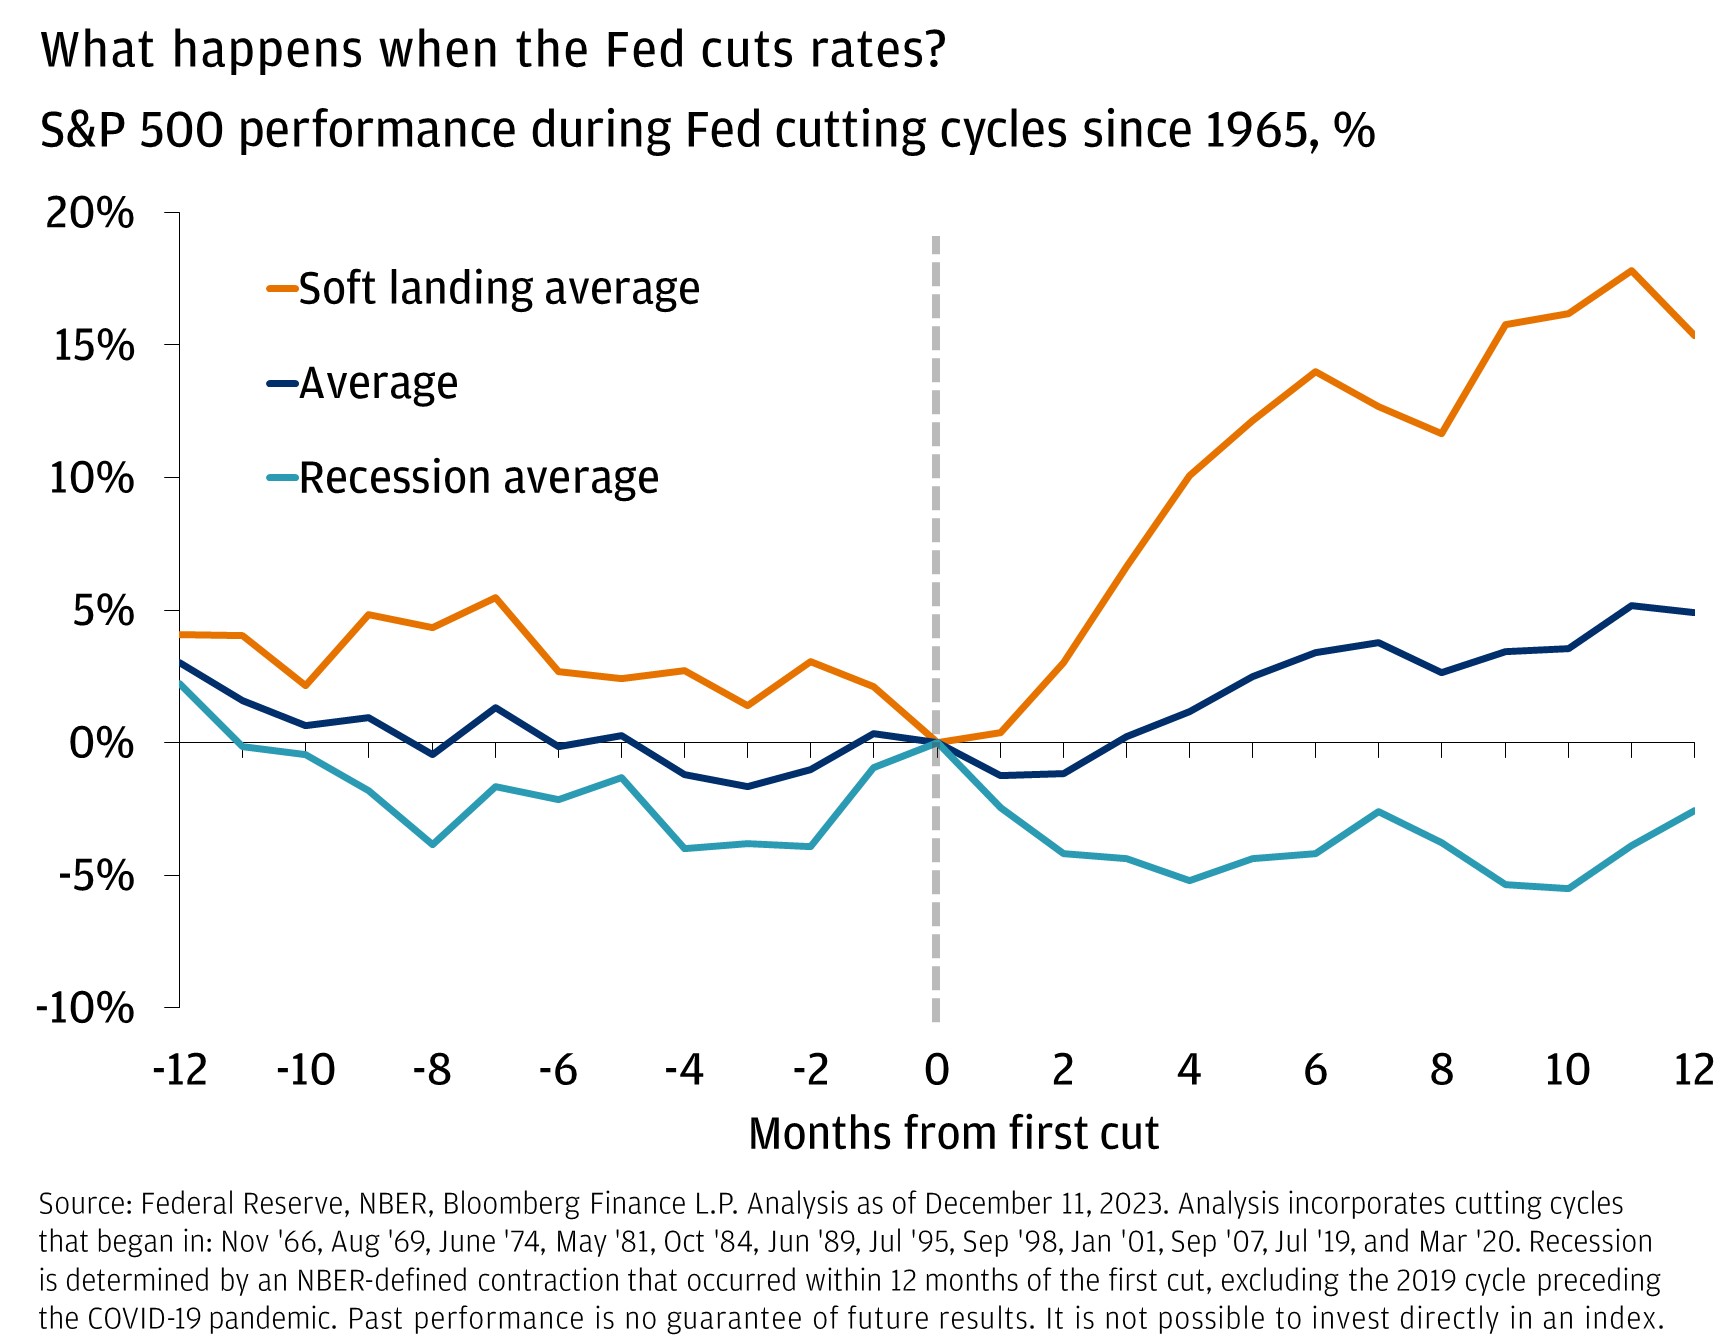 This chart shows S&P 500 performance during Fed cutting cycles since 1965.